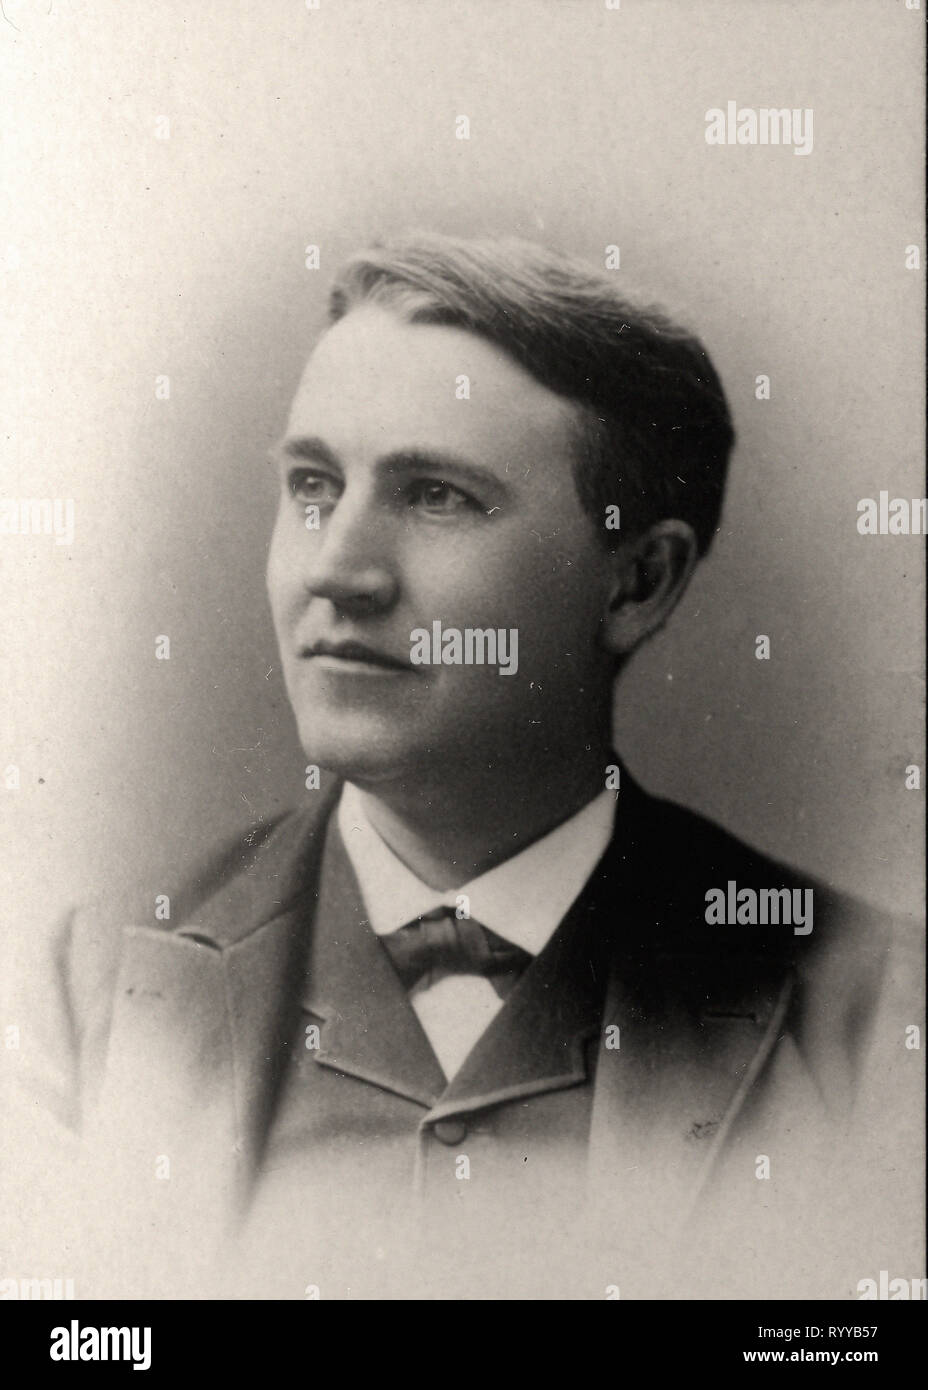 Photographic Portrait Of Edison   From Collection Félix Potin, Early 20th Century Stock Photo